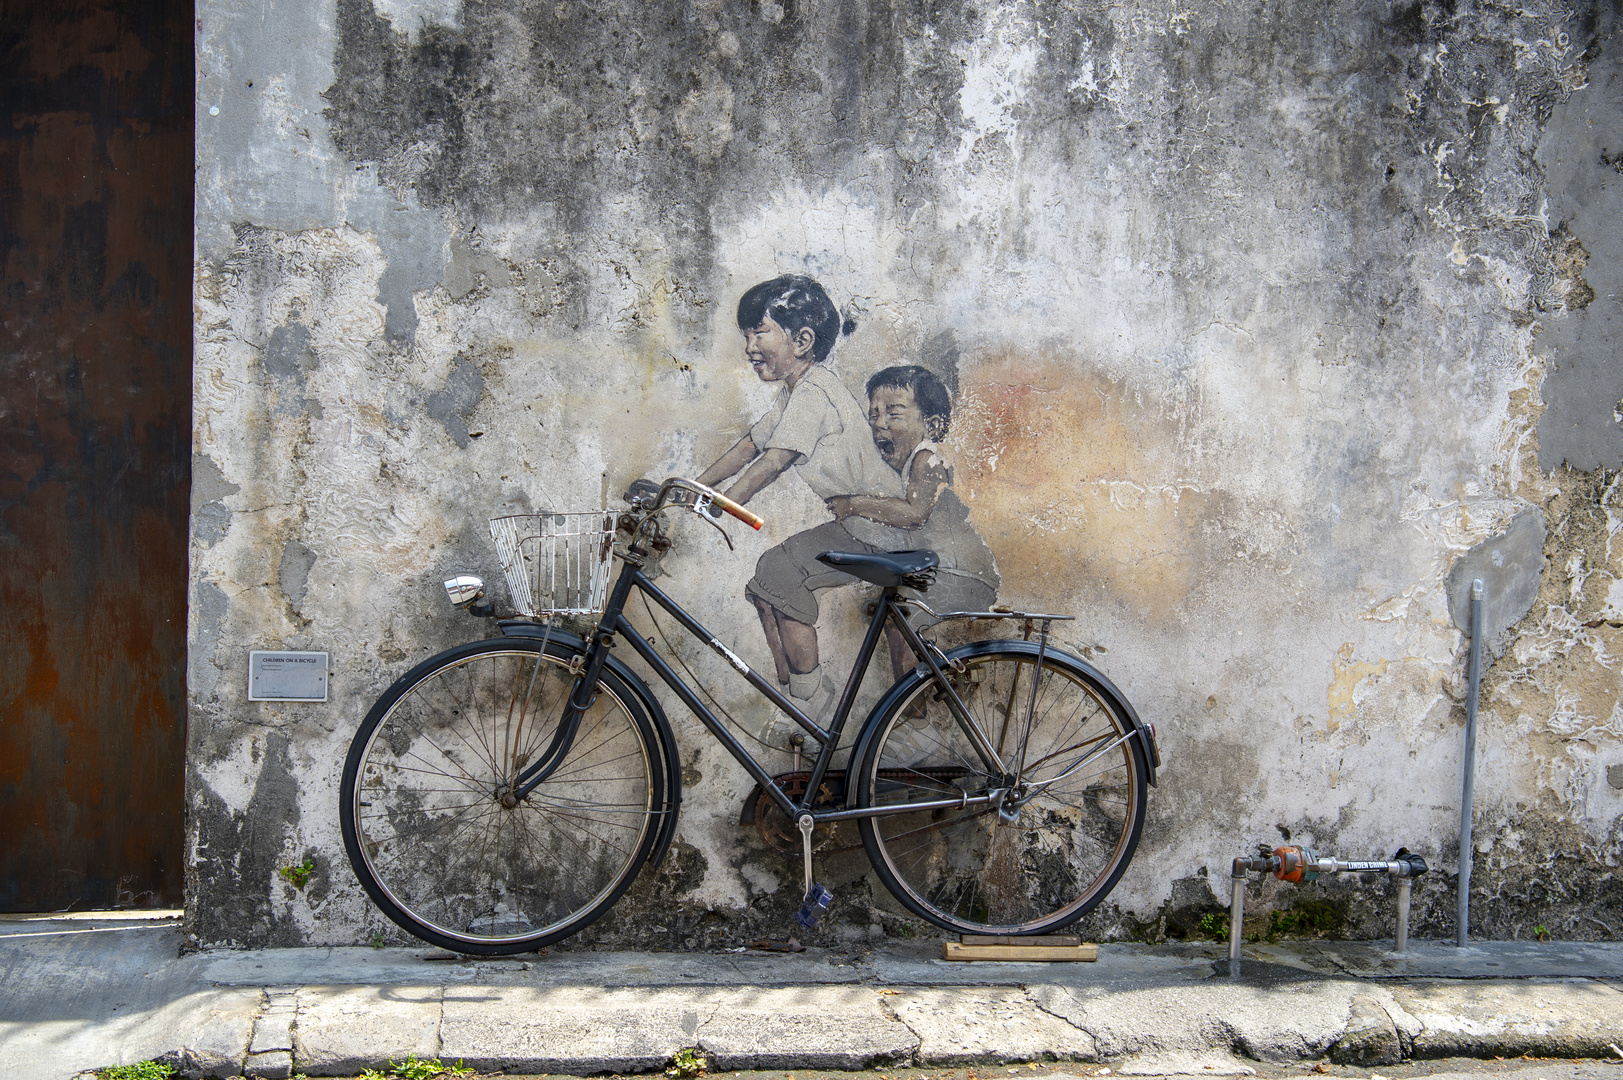 The famous mural in Georgetown - Kids on bicycle by Ernest Zacharevic